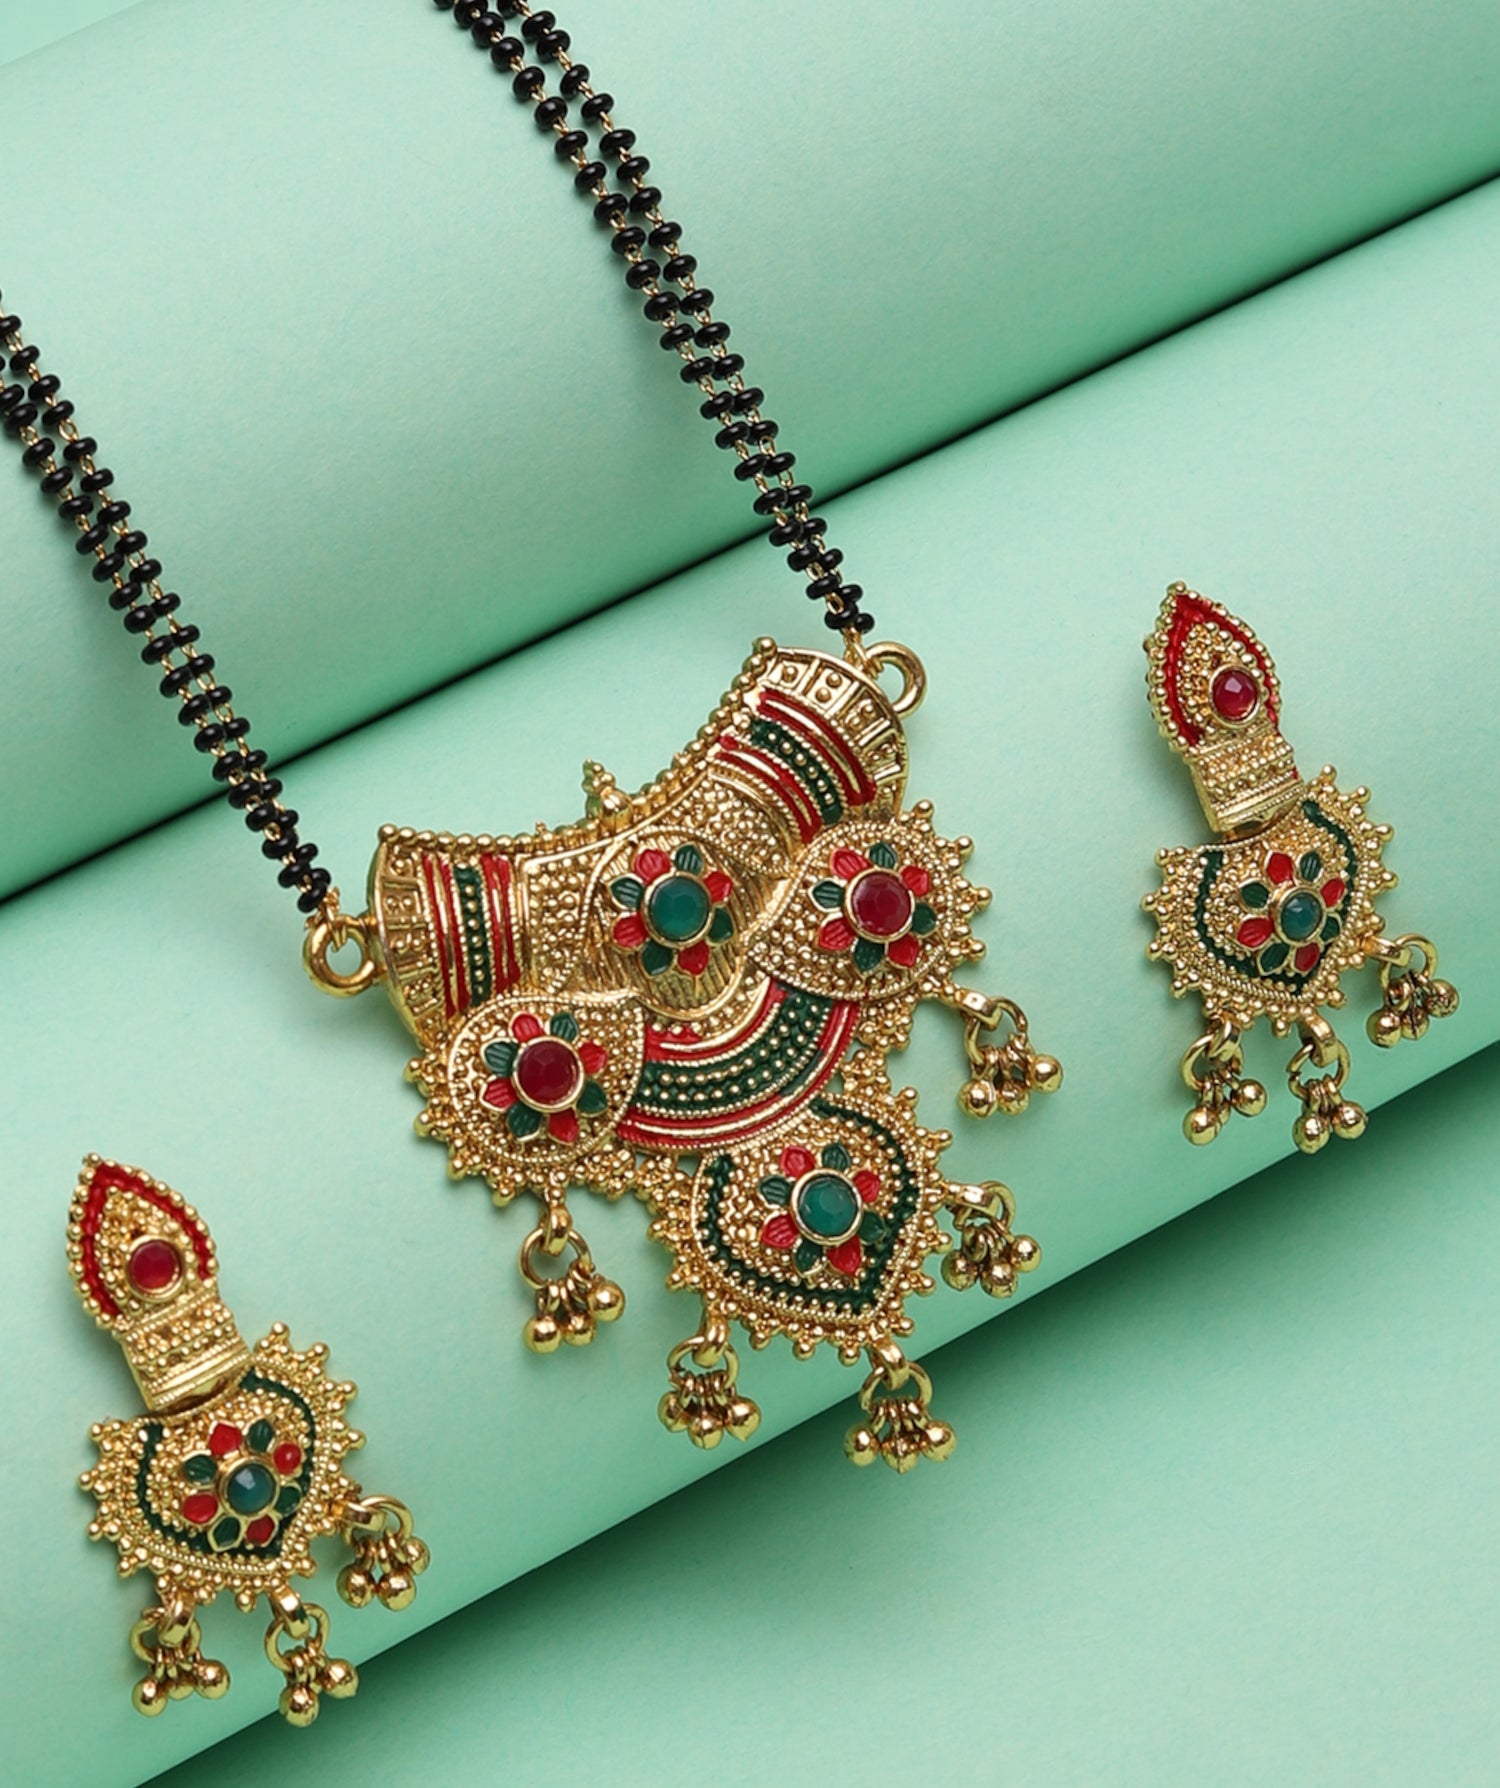  Traditional Gold Plated Mangalsutra with Earrings | Buy This Jewellery Online from Mekkna